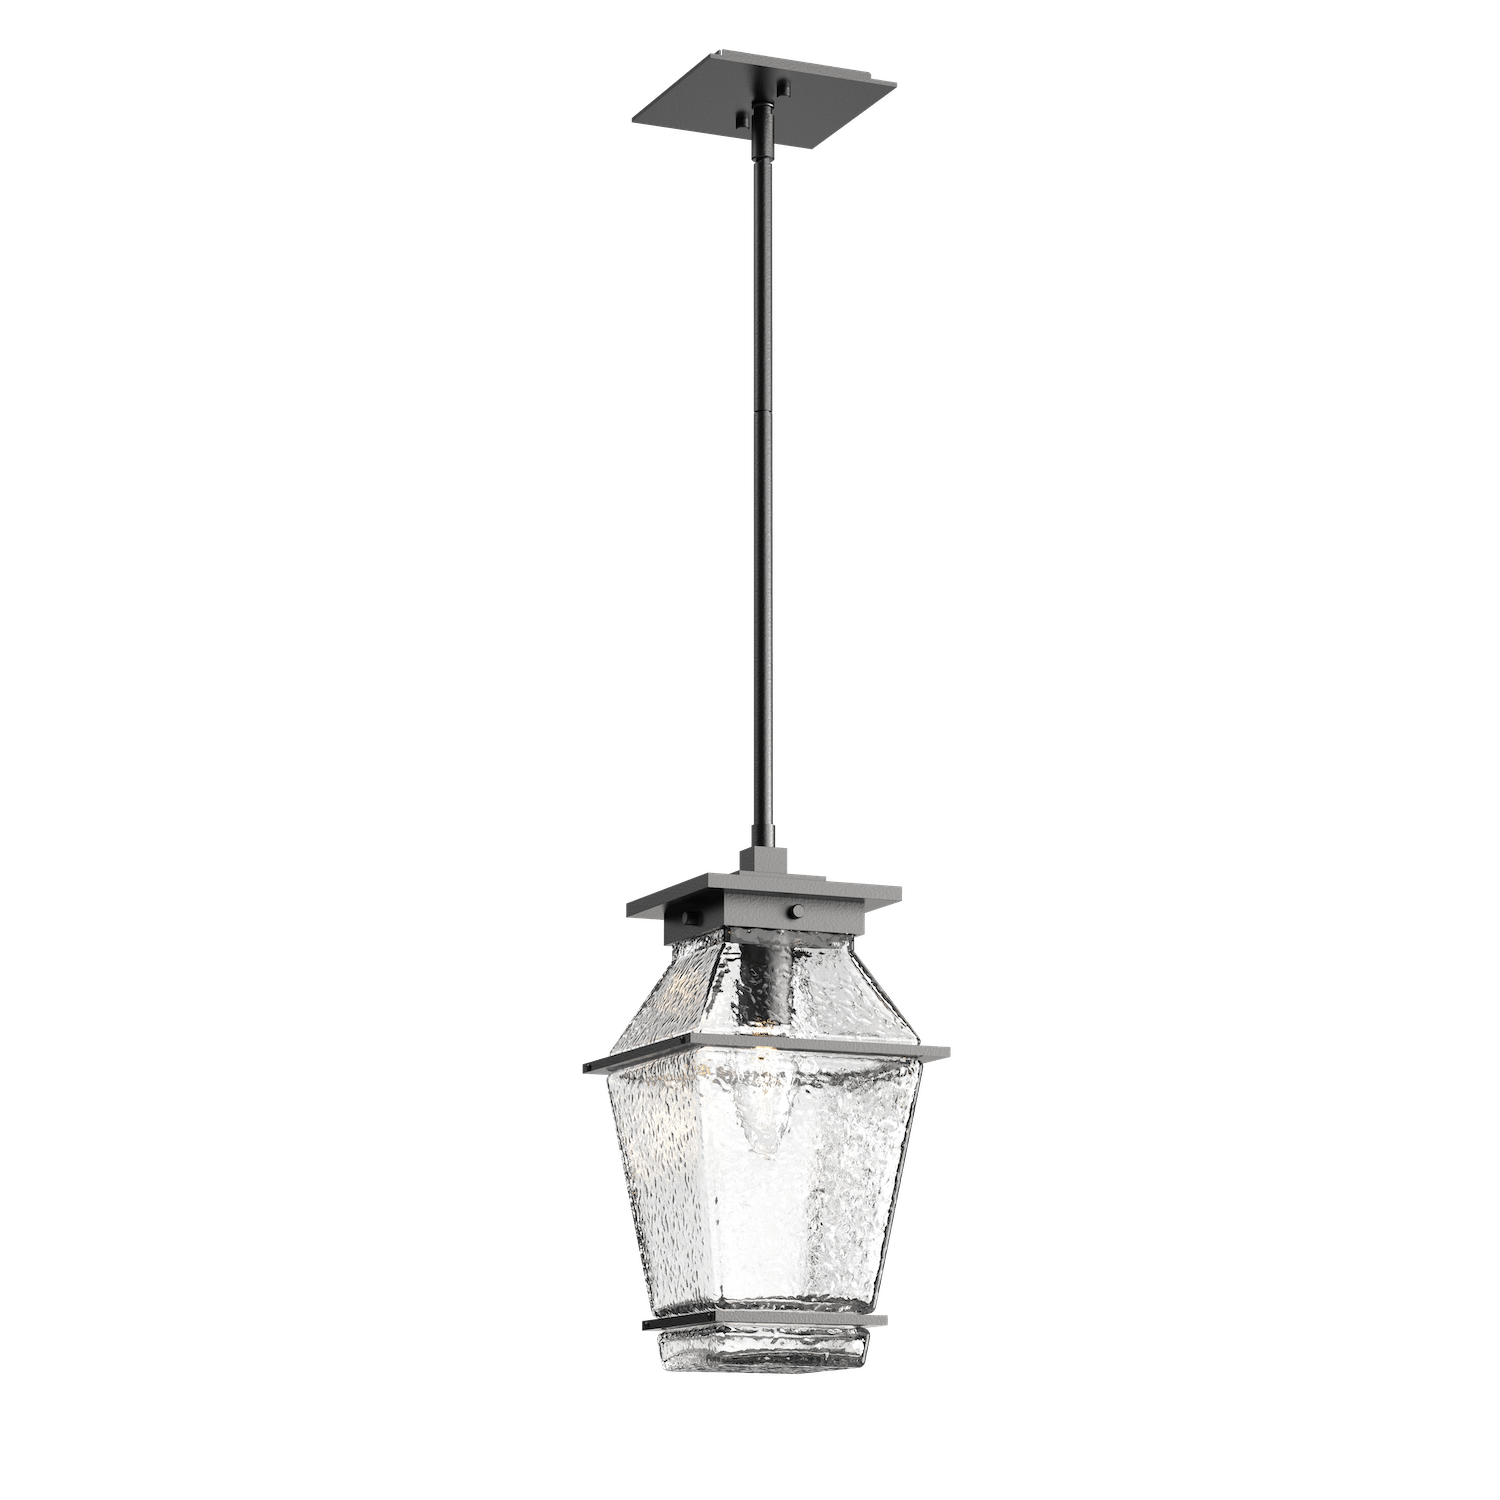 OPB0077-01-AG-C-Hammerton-Studio-Landmark-16-inch-outdoor-pendant-light-with-argento-grey-finish-and-clear-blown-glass-shades-and-incandescent-lamping